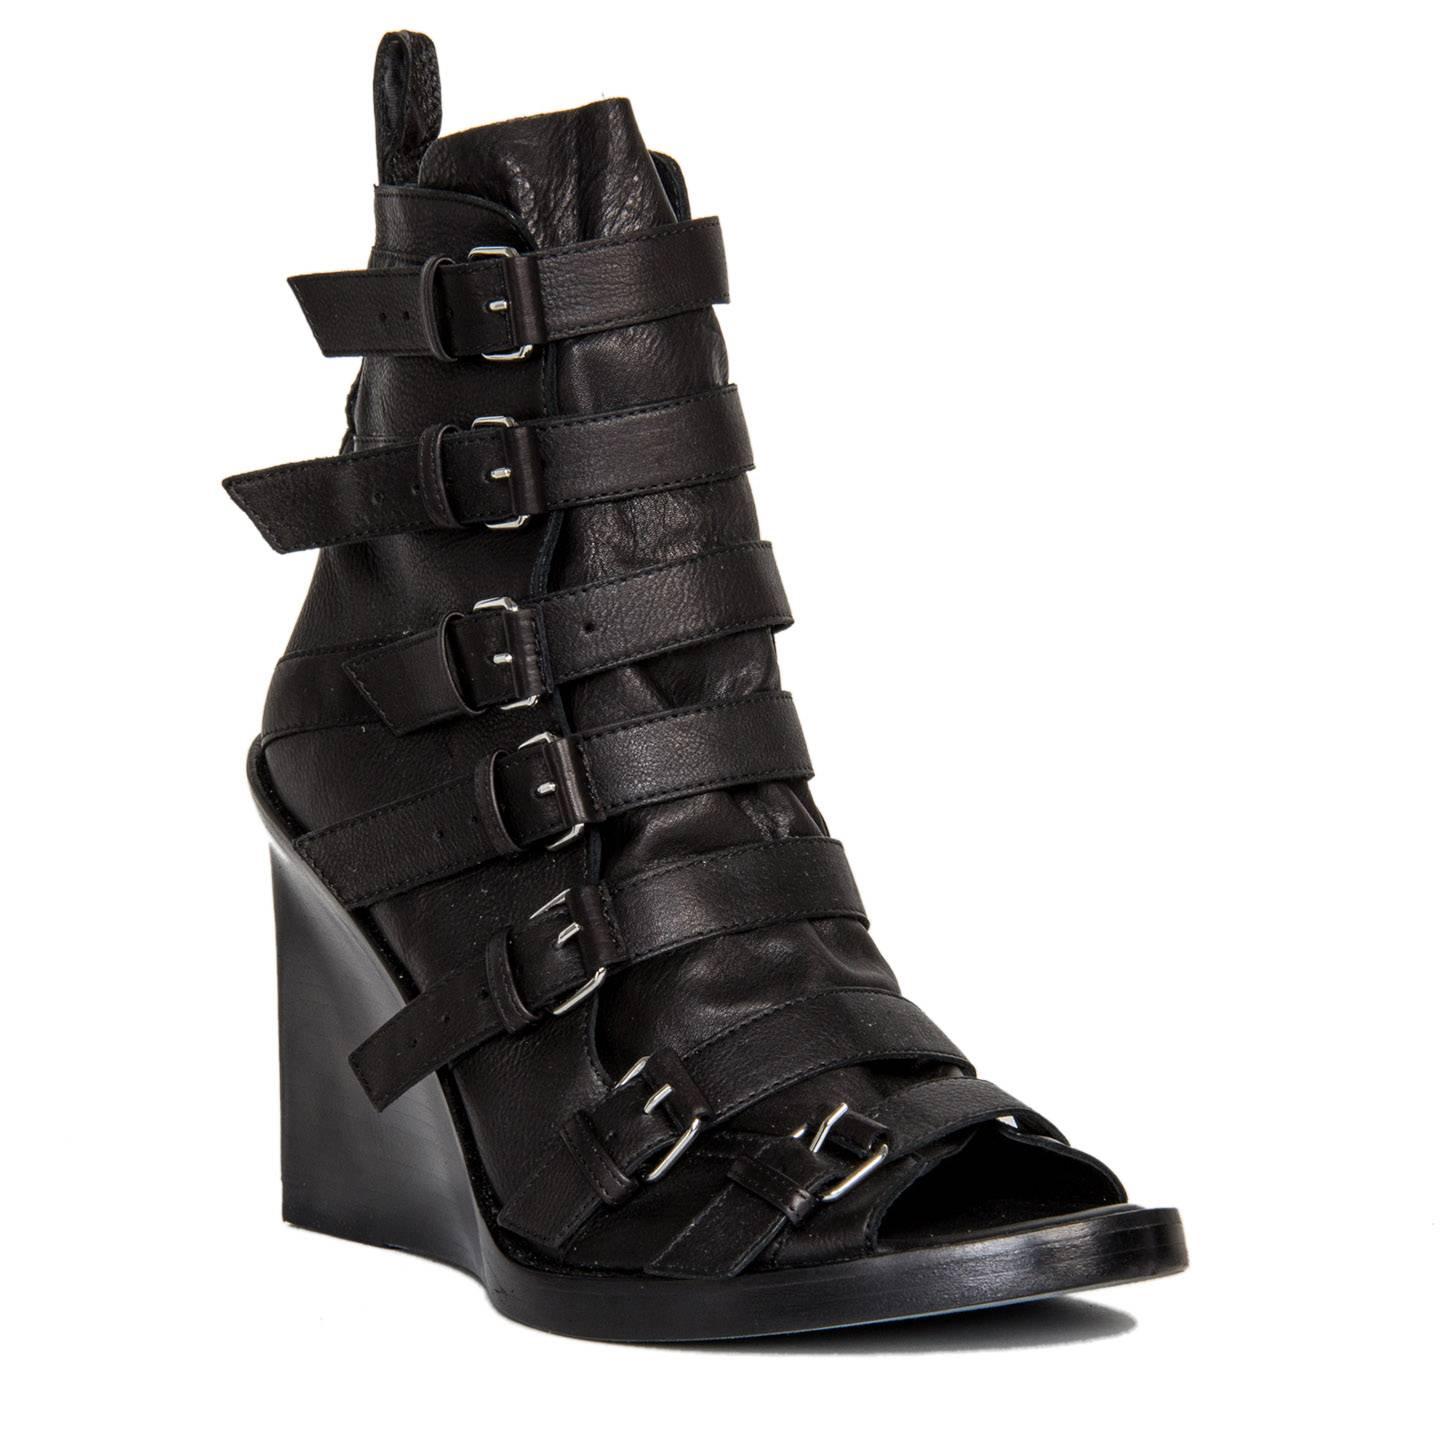 Black leather bondage buckles ankle boots with open front and stacked wedge and sole. Vero Cuoio. Made in Italy. Heel 4